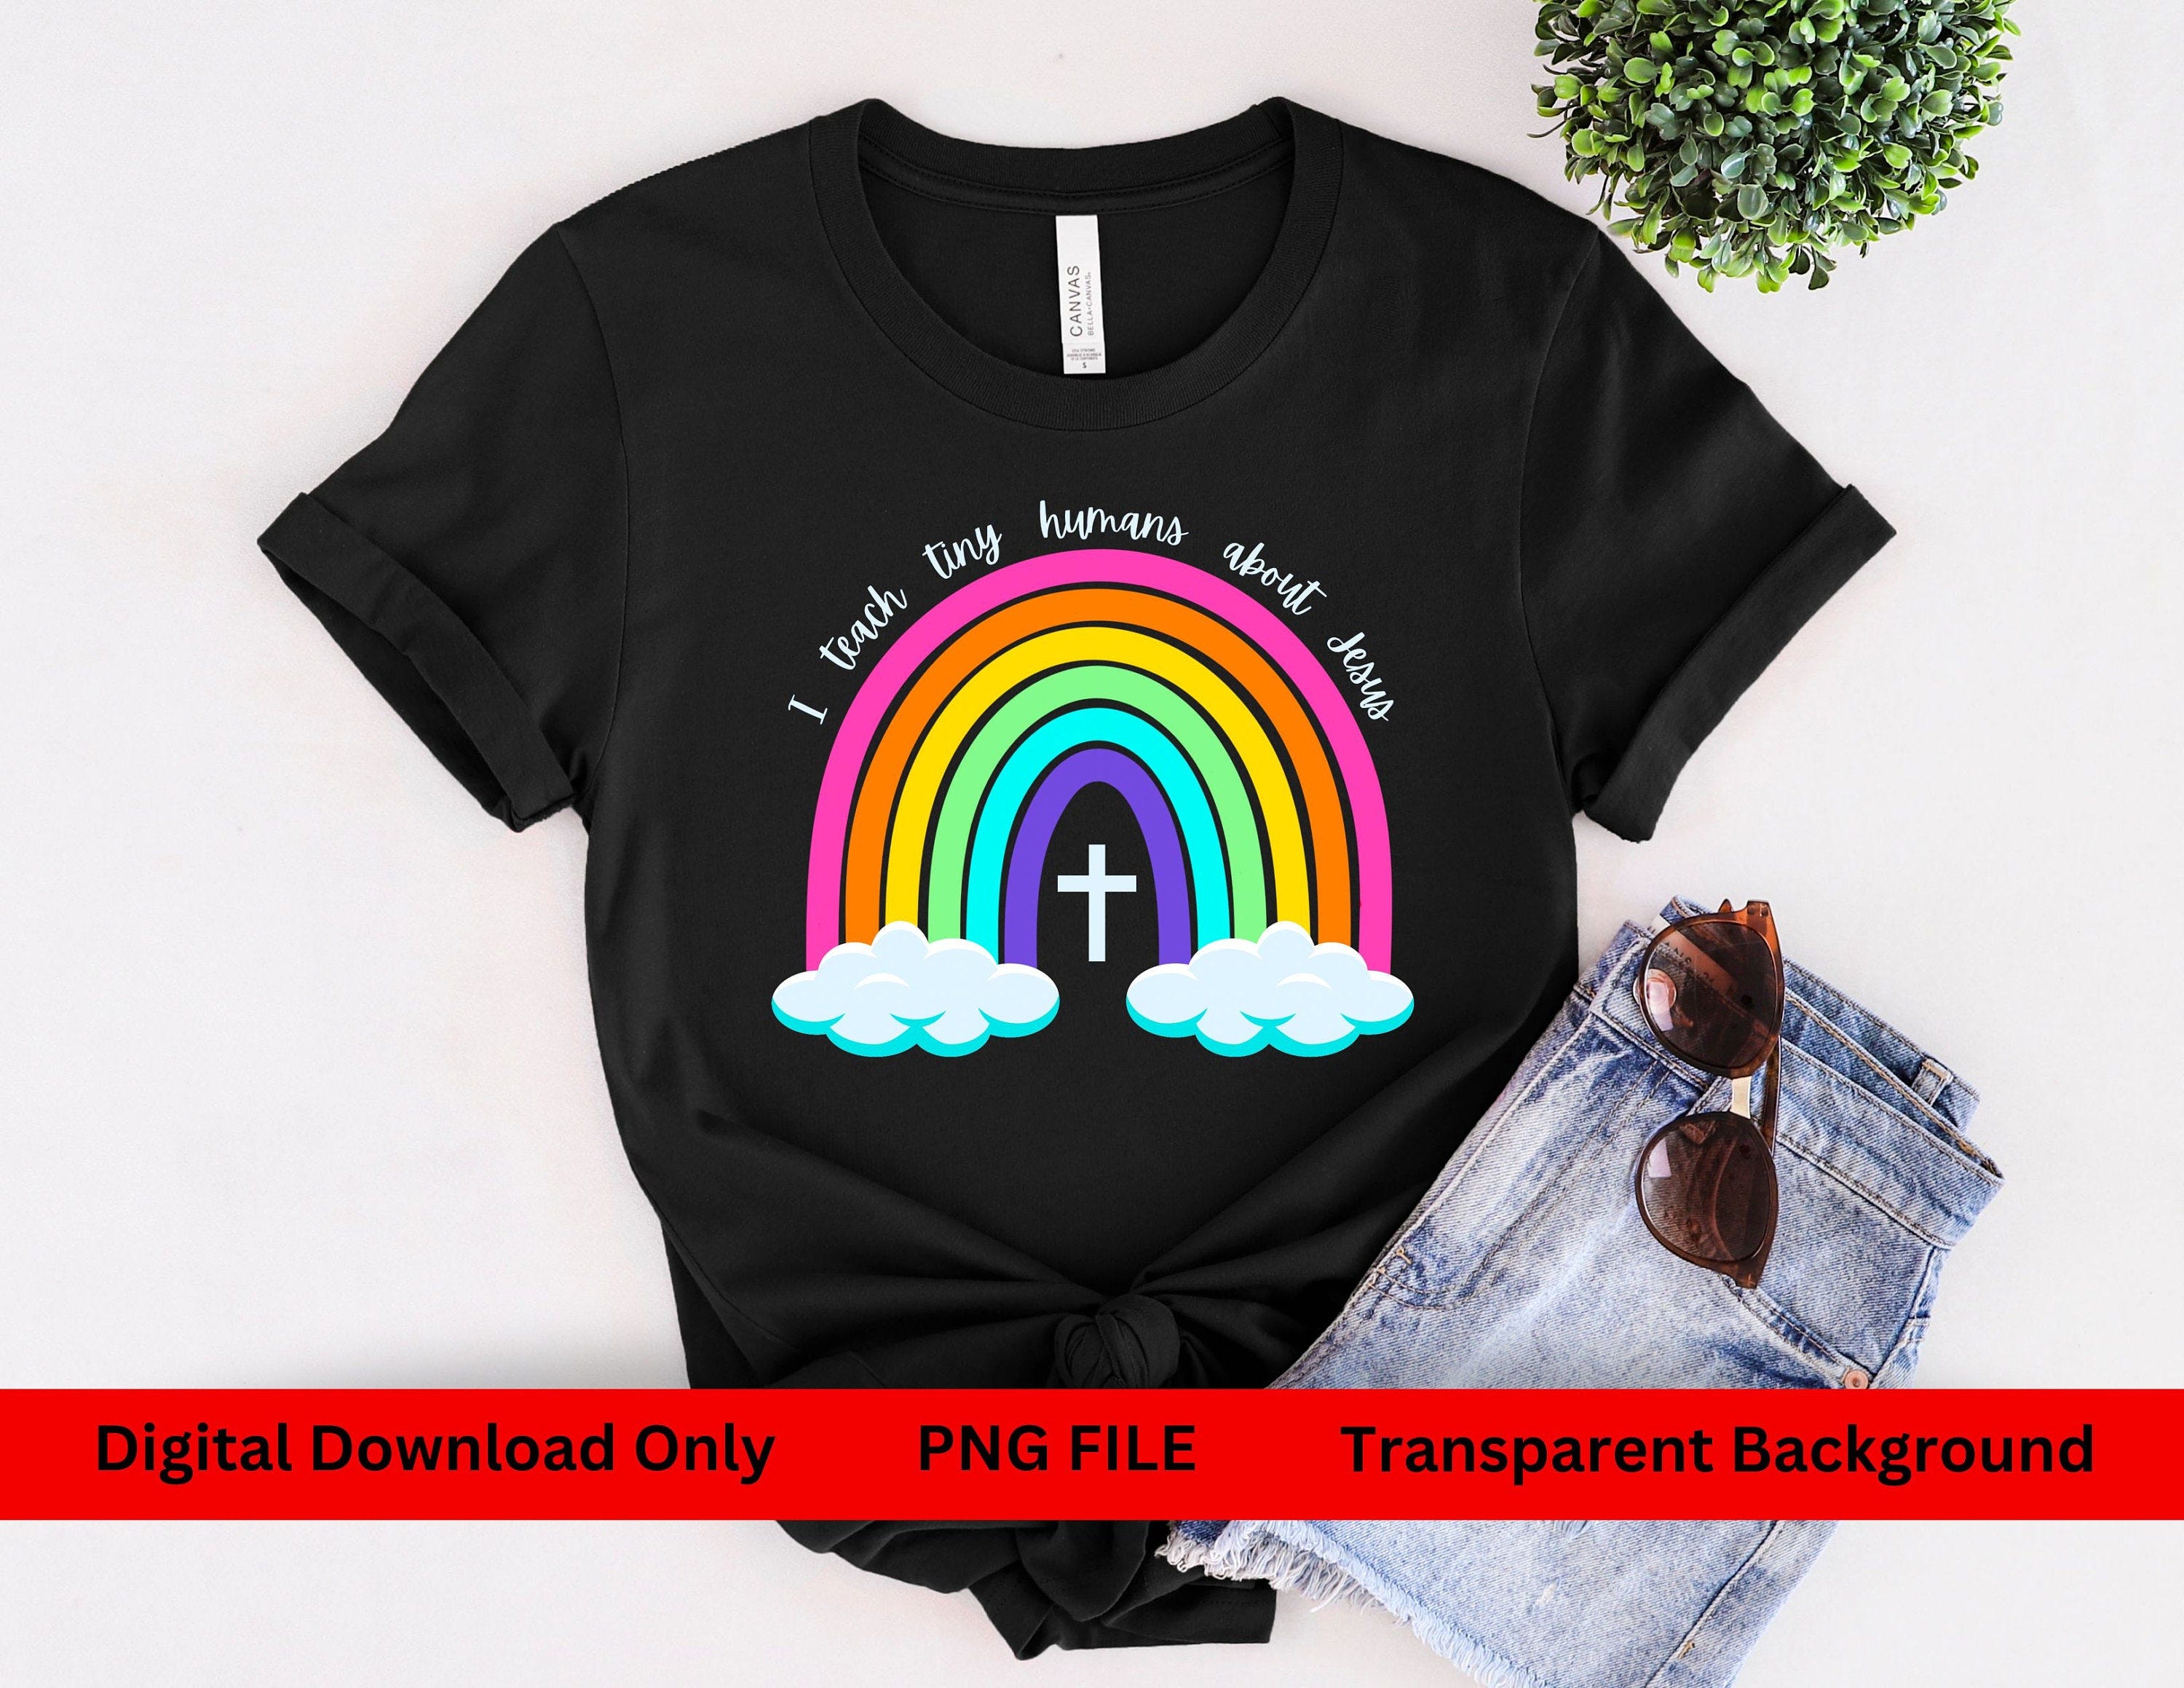 Sunday School Teacher, I Teach Tiny Humans About Jesus, PNG, PNG file, Digital Download, Church png, T-Shirt Design, Rainbow Png